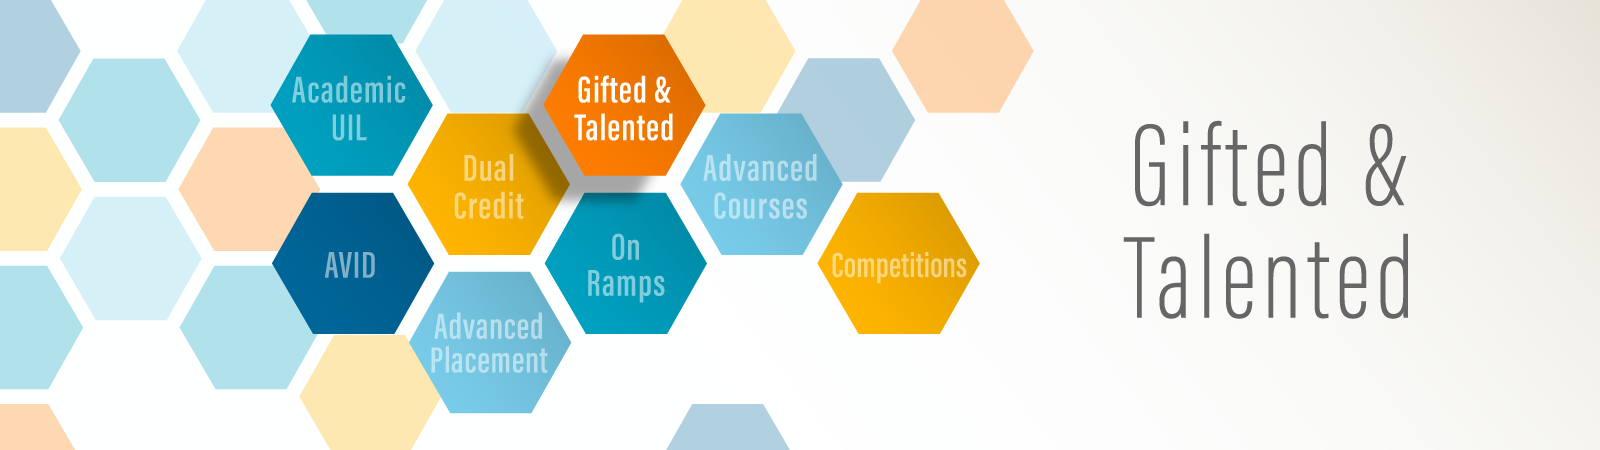 Banner with title Gifted and talented on the right, with multiple colorful Hexagons on the left with the words gifted and talented, advanced courses, competitions, on ramps, dual credit, advanced placement, AVID and Academic UIL inside of each hexagon